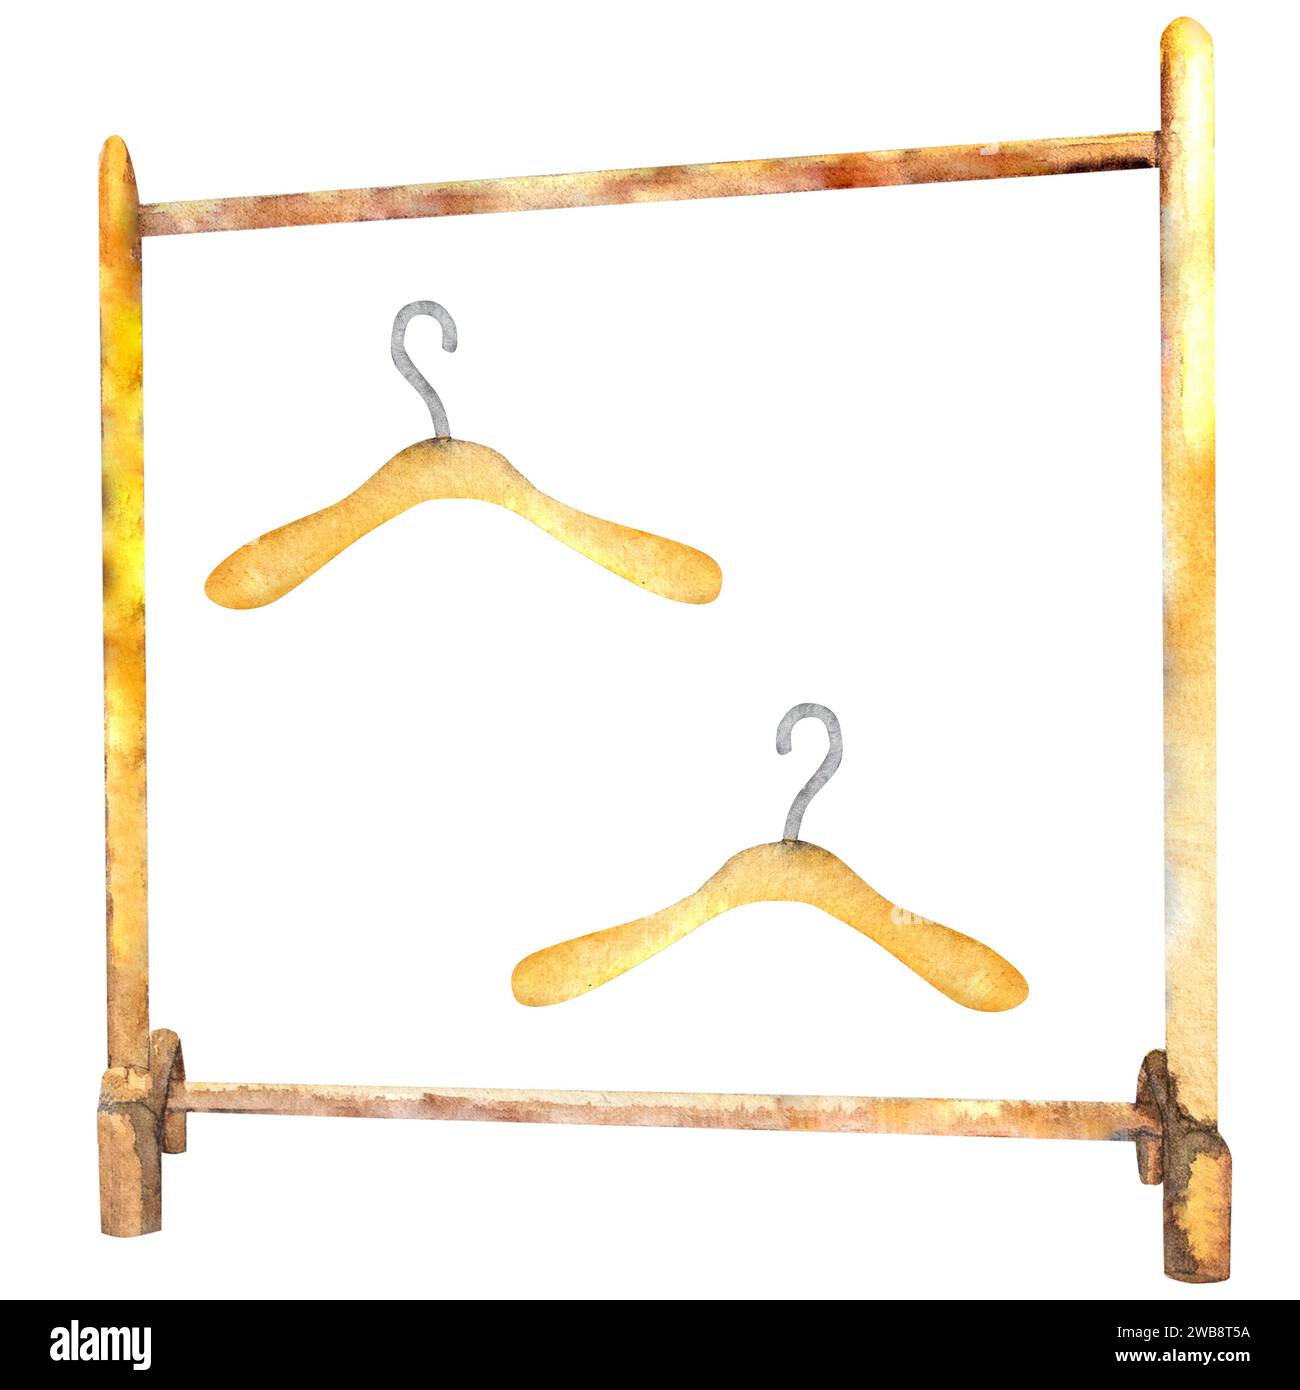 Watercolor illustration of wooden floor coat rack and clothes rack. Stock Photo